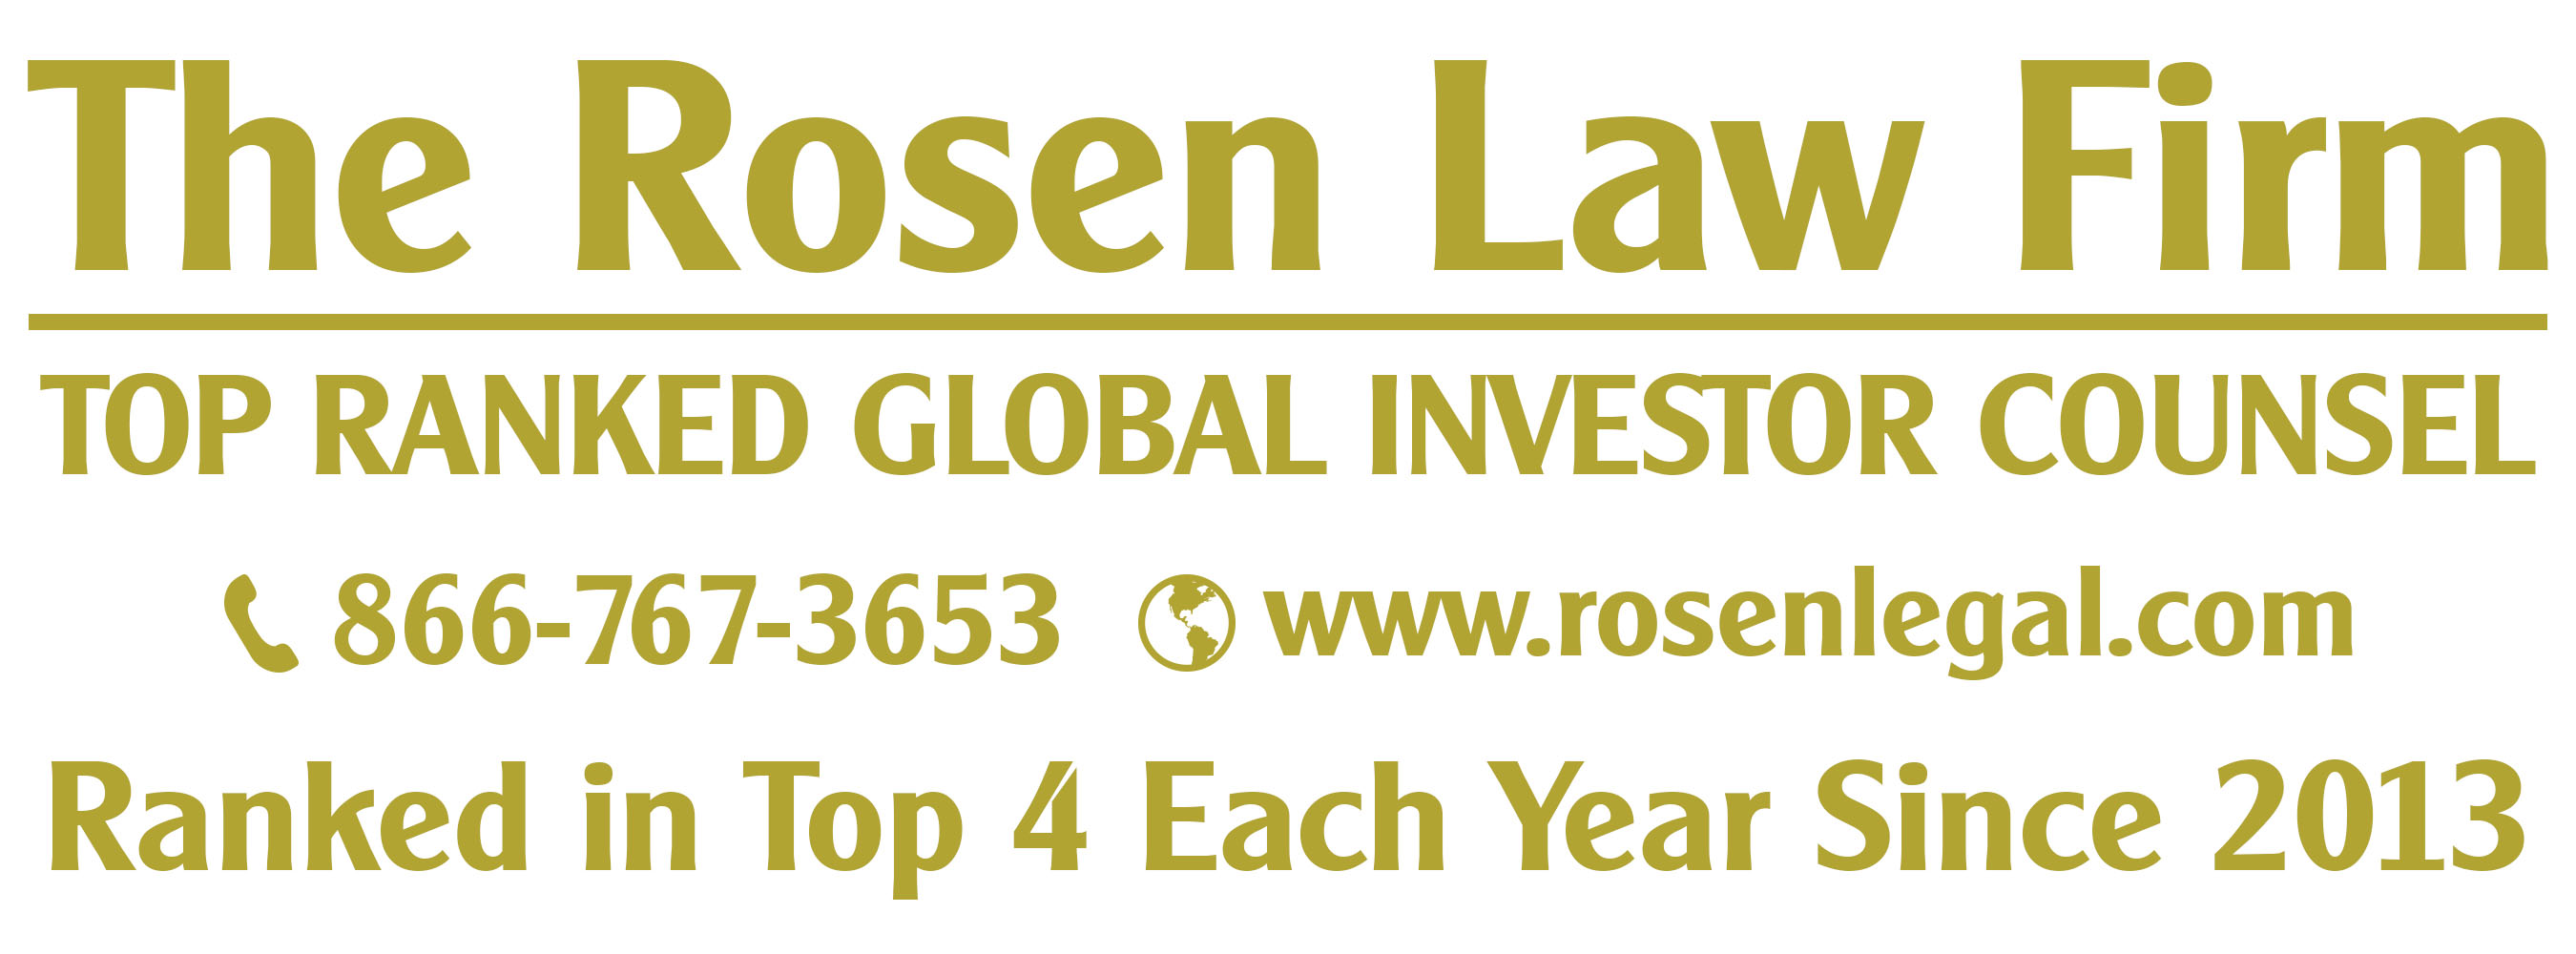 Rosen Law Firm PA, Tuesday, January 31, 2023, Press release picture